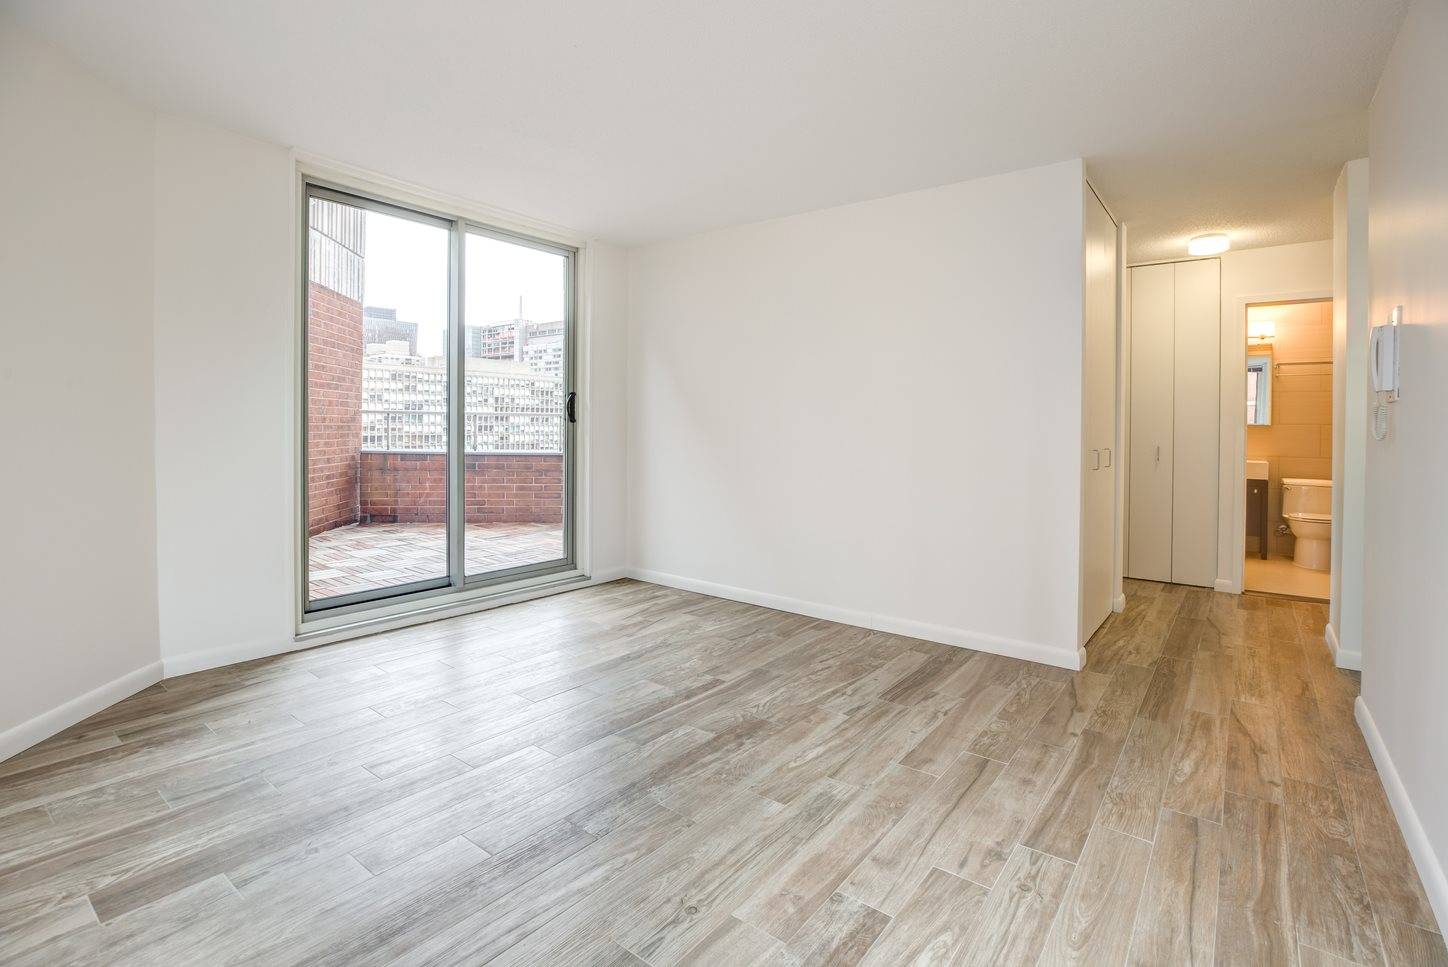 Magnificent 2 Bed/1 Bath Apartment In Kips Bay With Premier Amenities